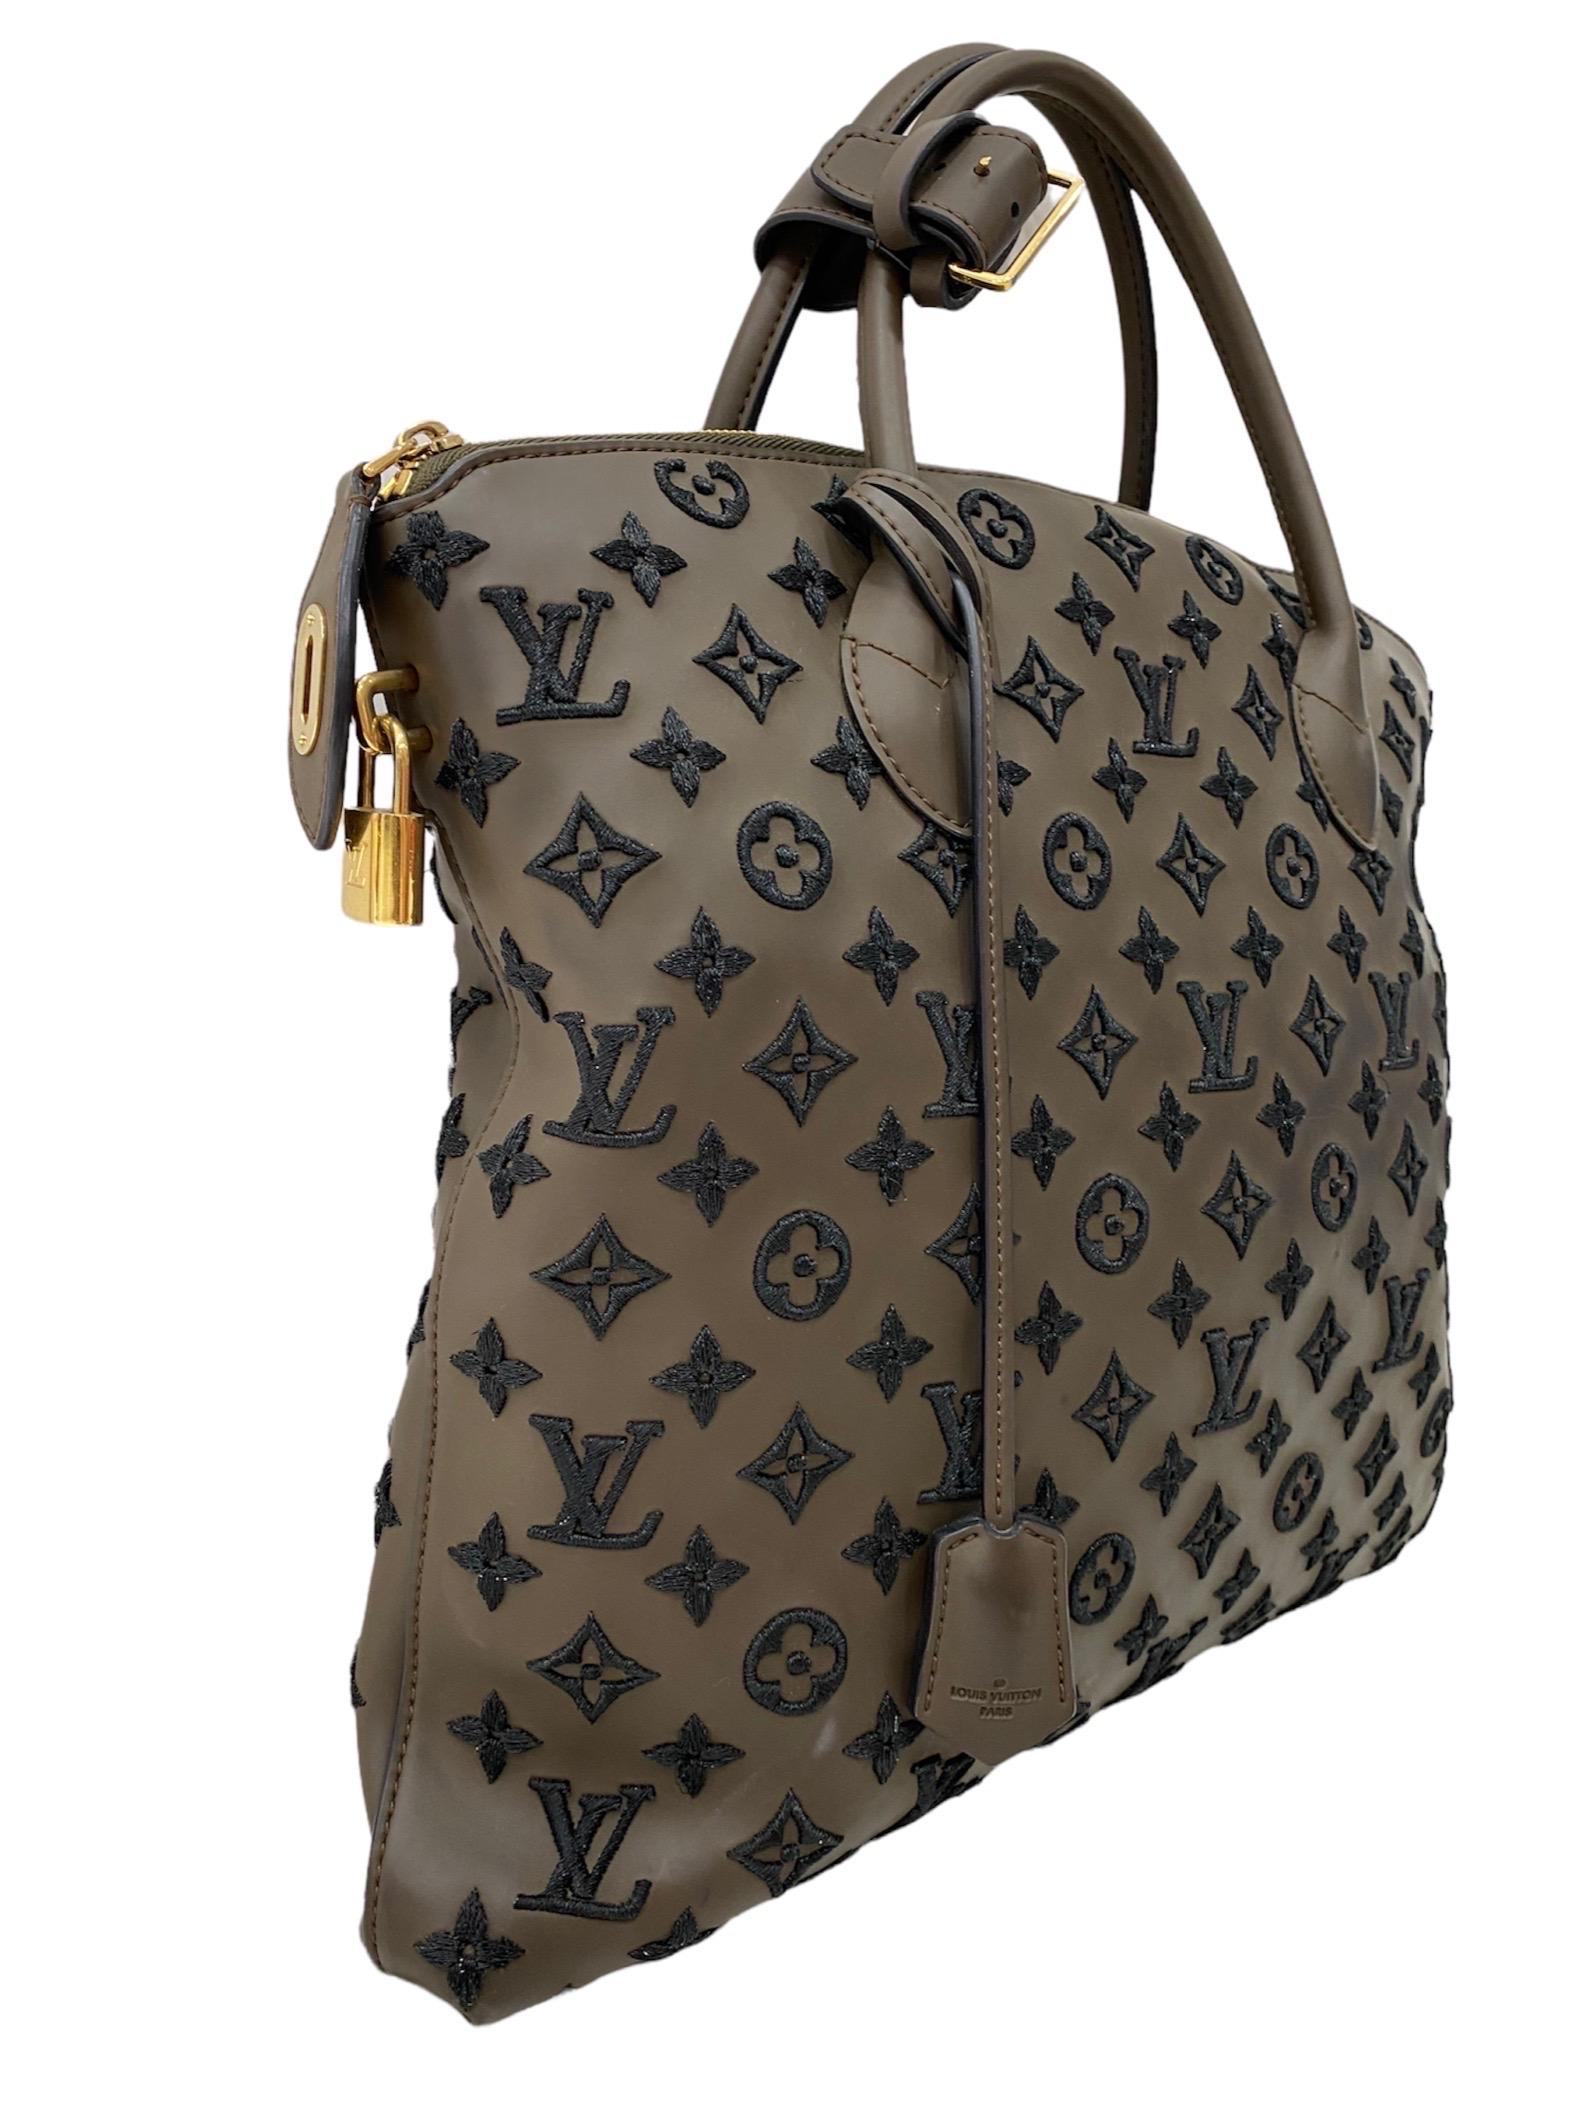 Louis Vuitton bag, Lockit model, limited edition 2011/2012 collection, made of matte brown leather with raised black laminated thread monogram and golden hardware. The product is equipped with a zip closure, internally lined in black suede, quite